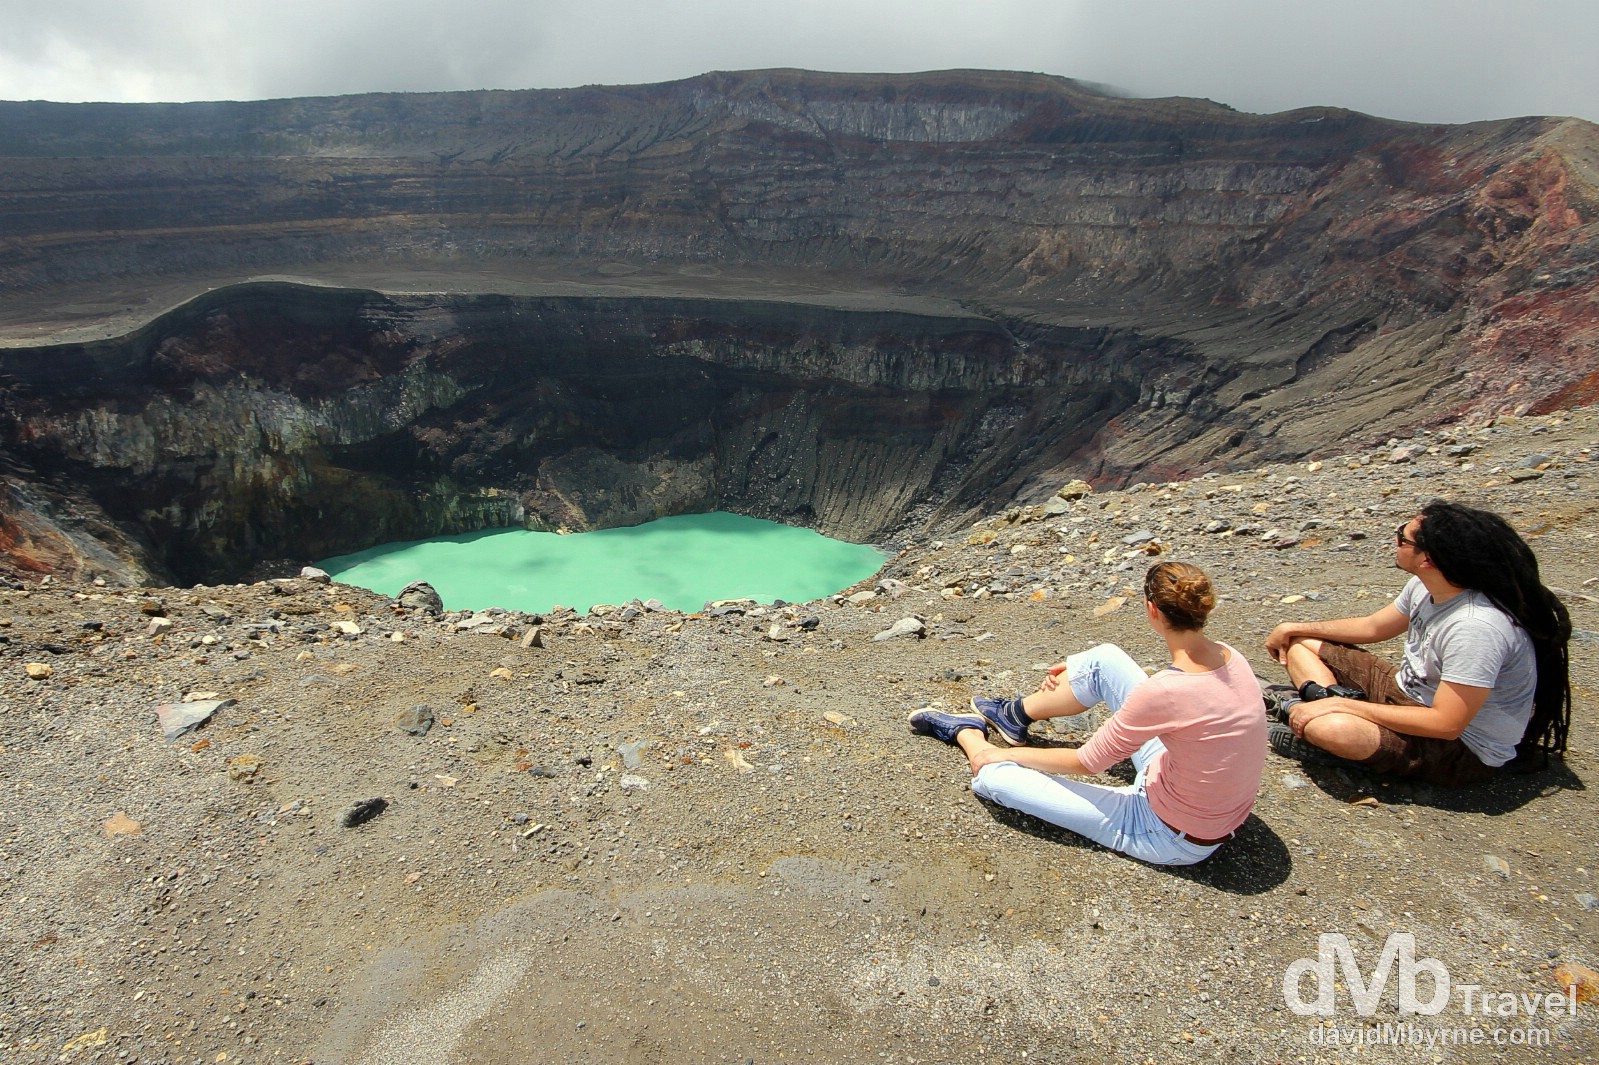 Members of my climbing party overlooking the emerald-green crater lake at the summit of the Santa Ana volcano, El Salvador. May 28th 2013. 